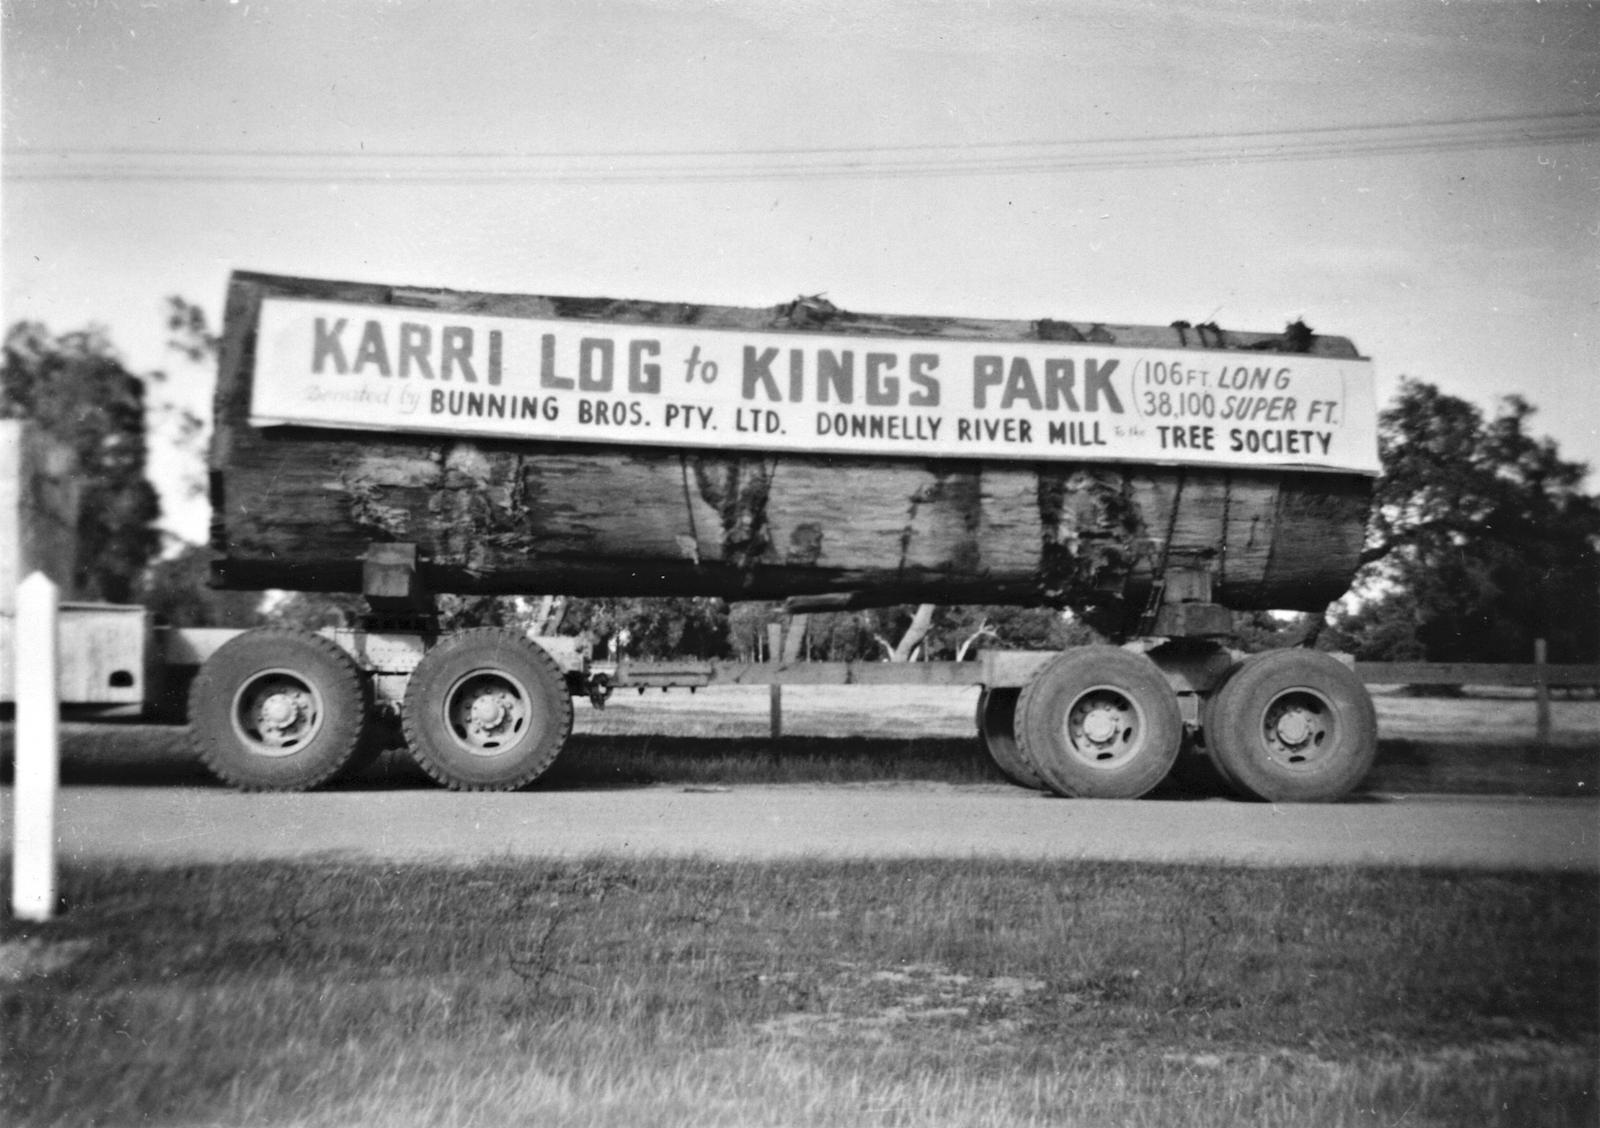 Elizabeth Karri tree transported from Donnelly River August 1958 to Kings Park